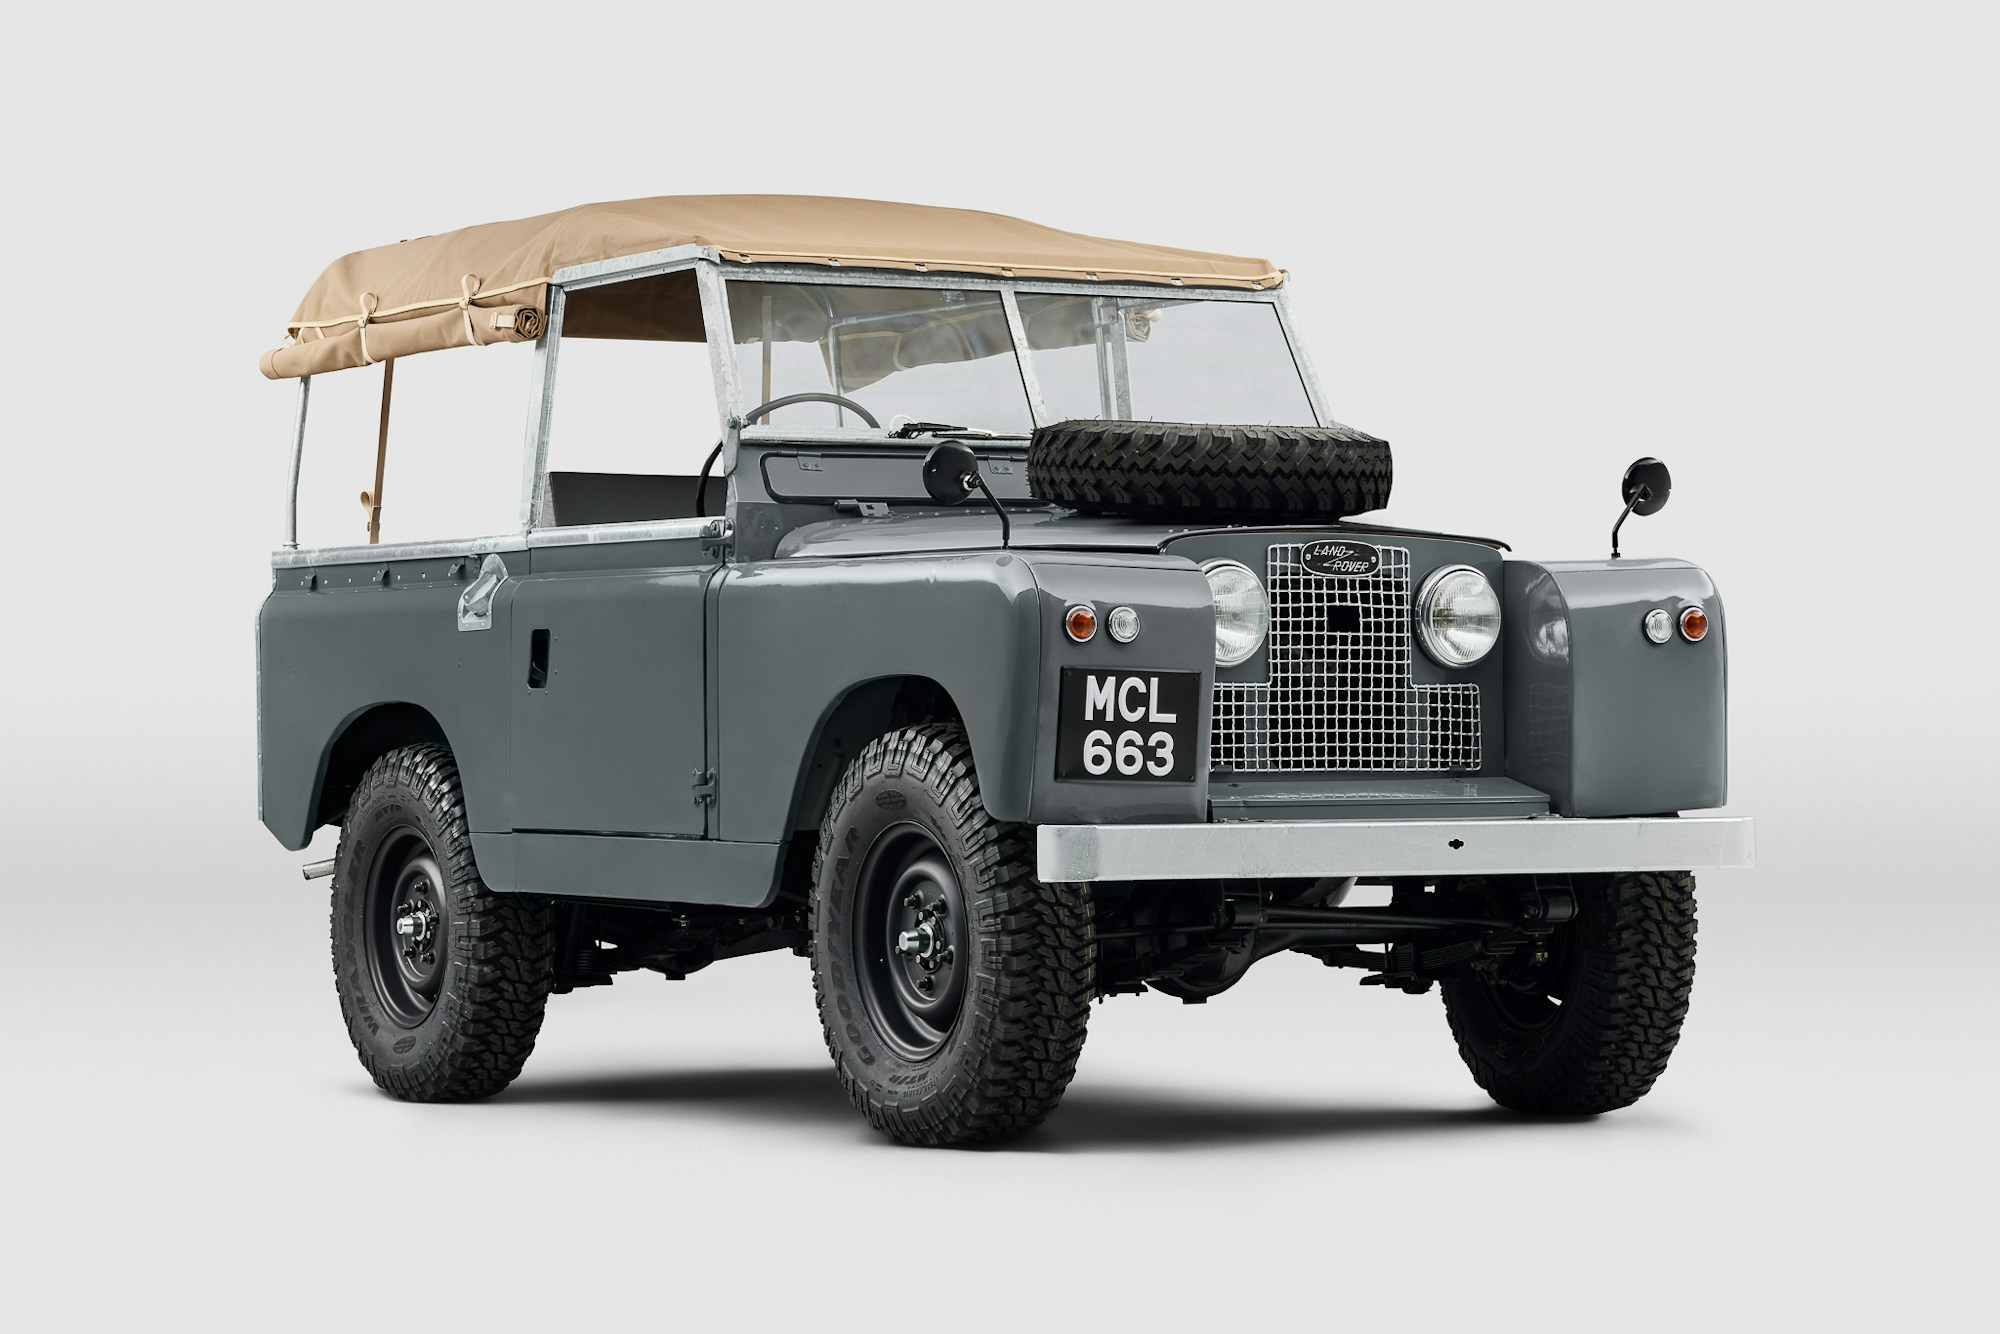 1958 Land Rover Series II 88 for sale by classified listing privately in  Worcestershire, United Kingdom